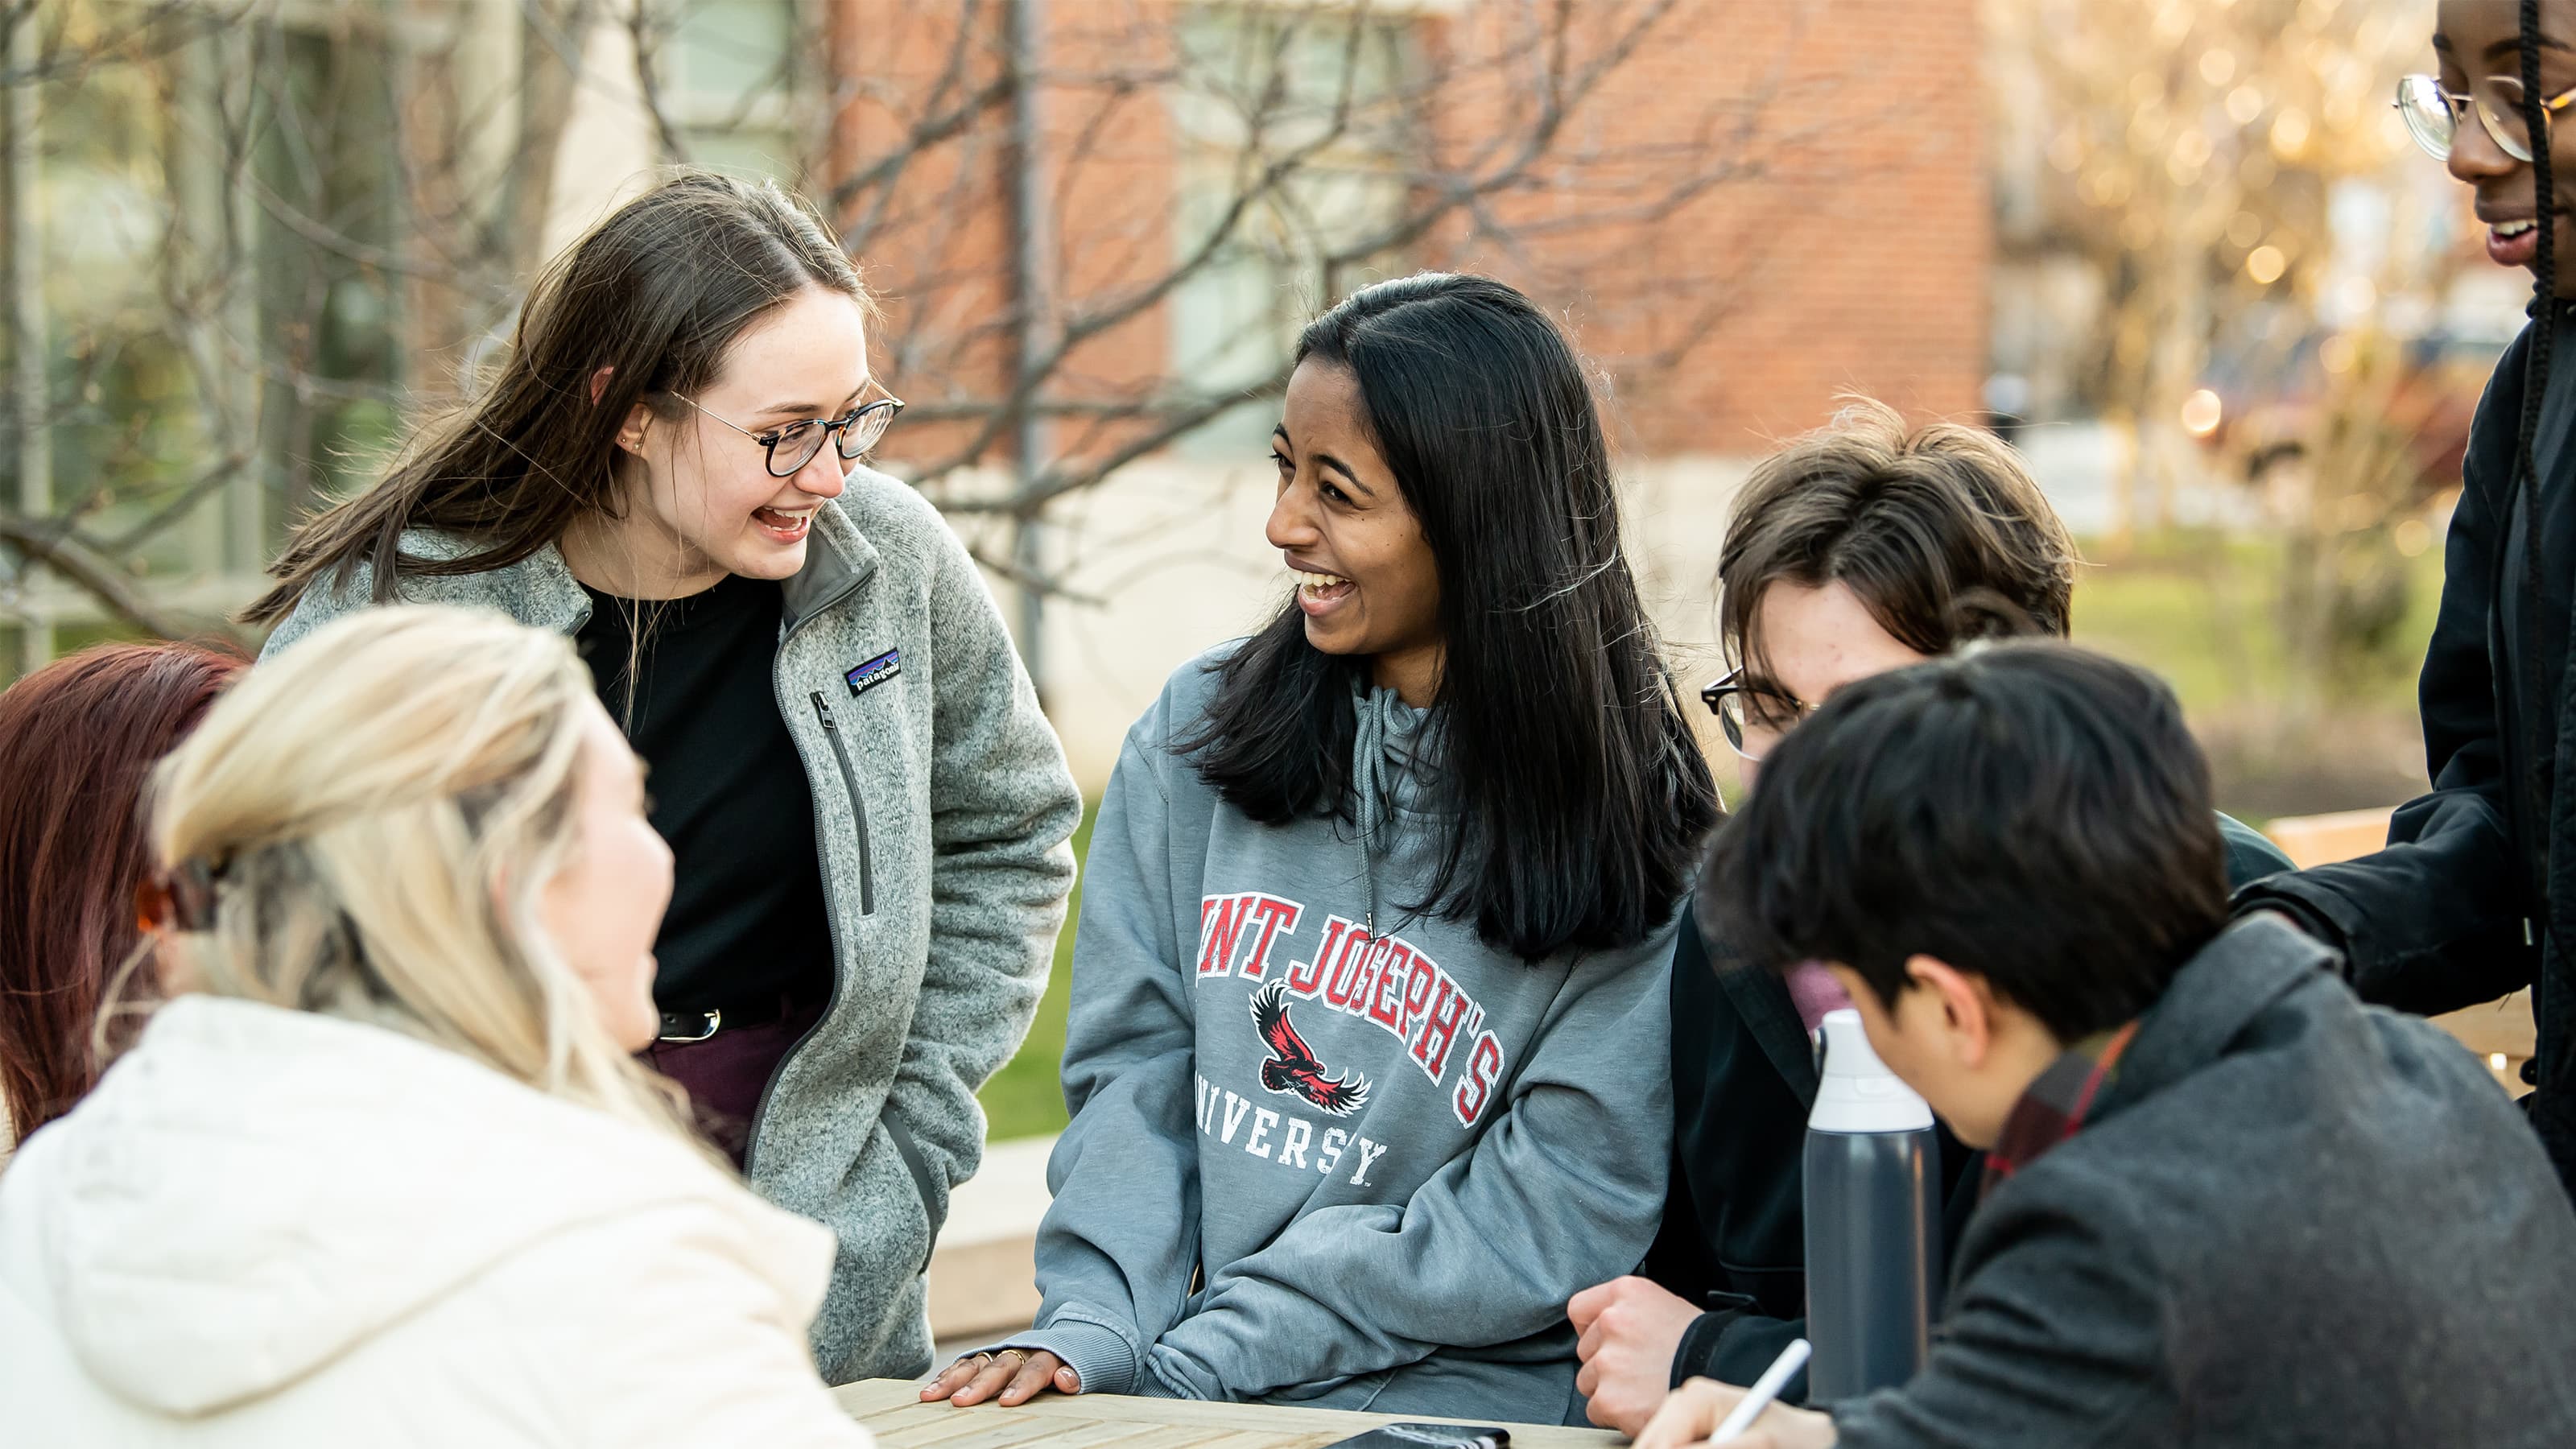 A group of students talking and laughing outside at a picnic table